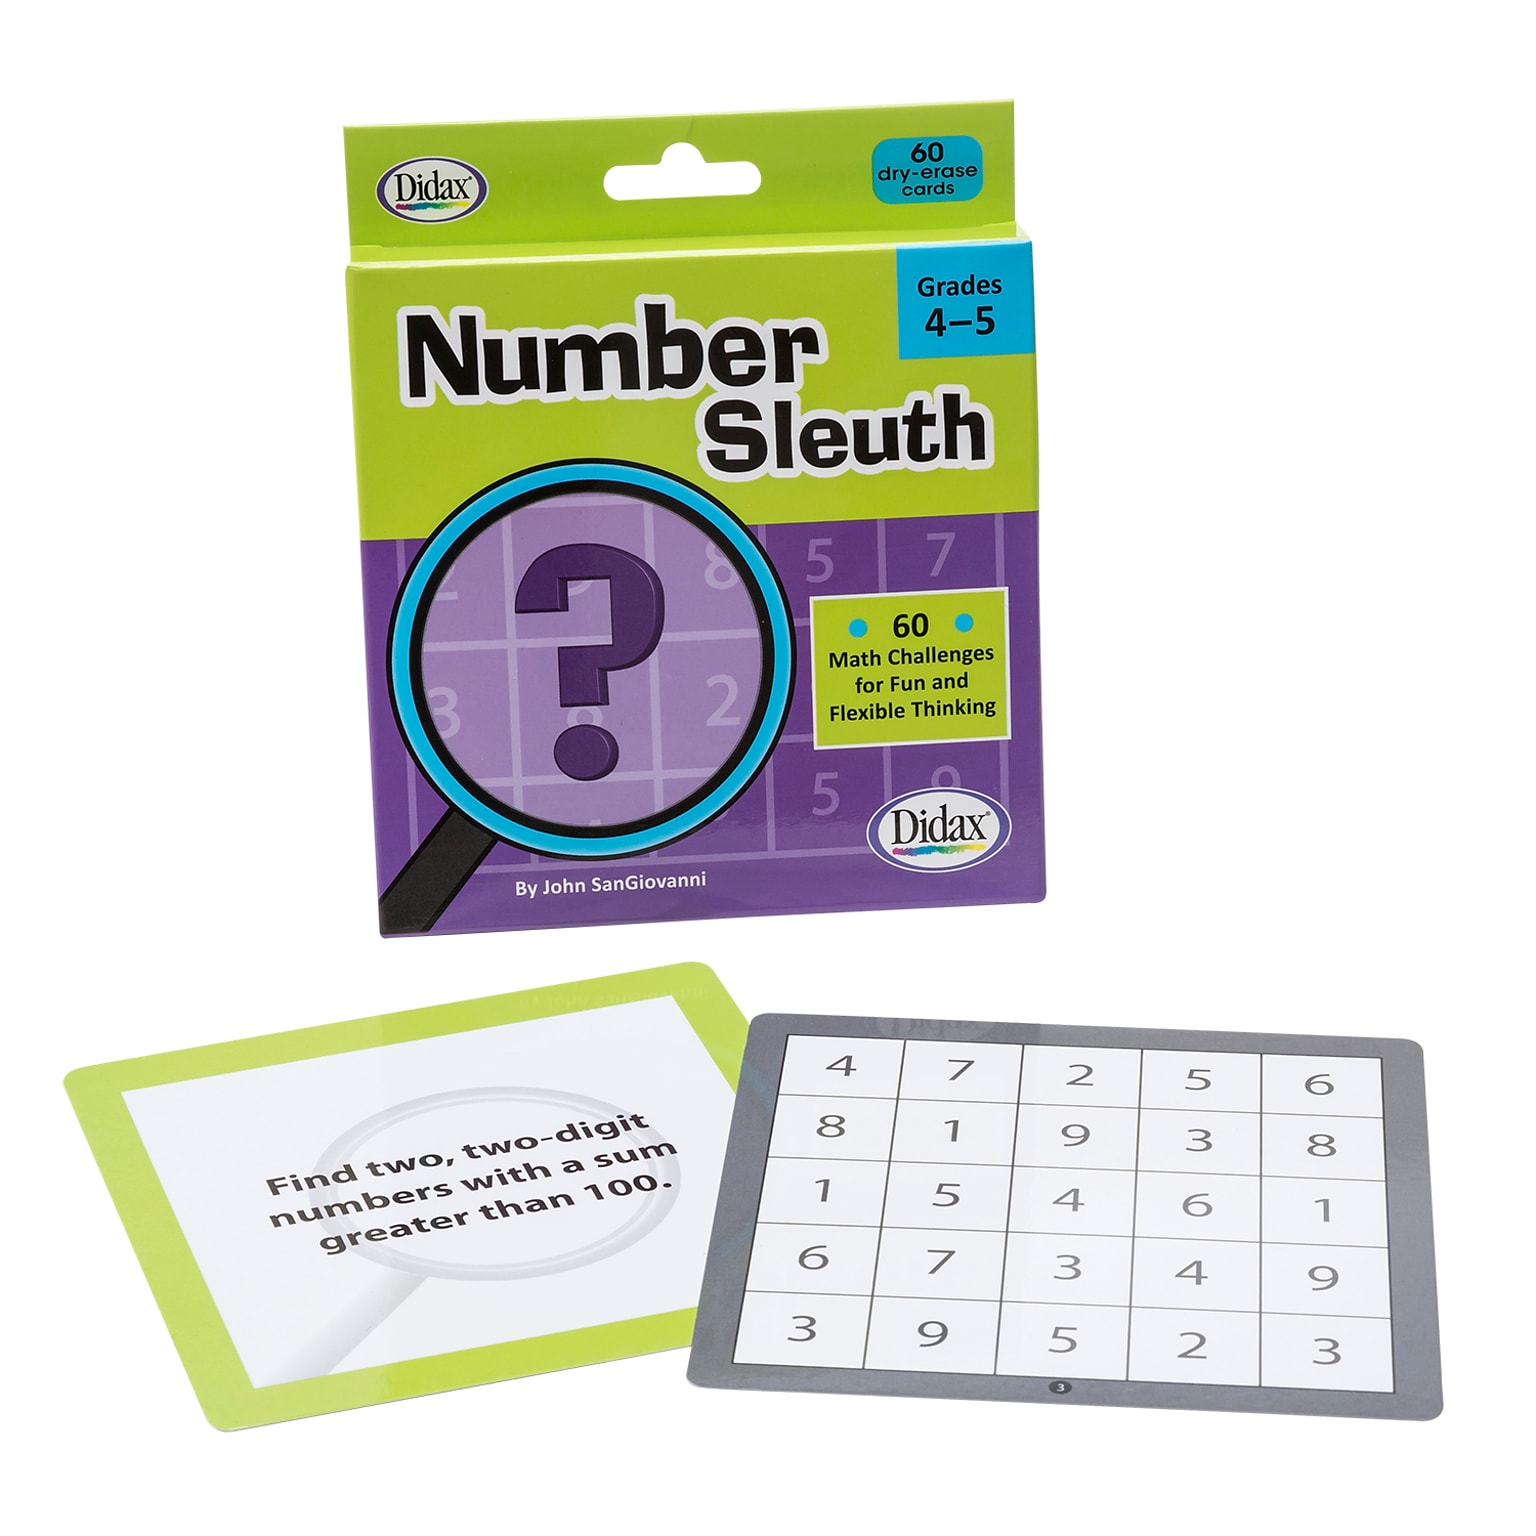 Didax Number Sleuth, Grade 4-5 (DD-211745)